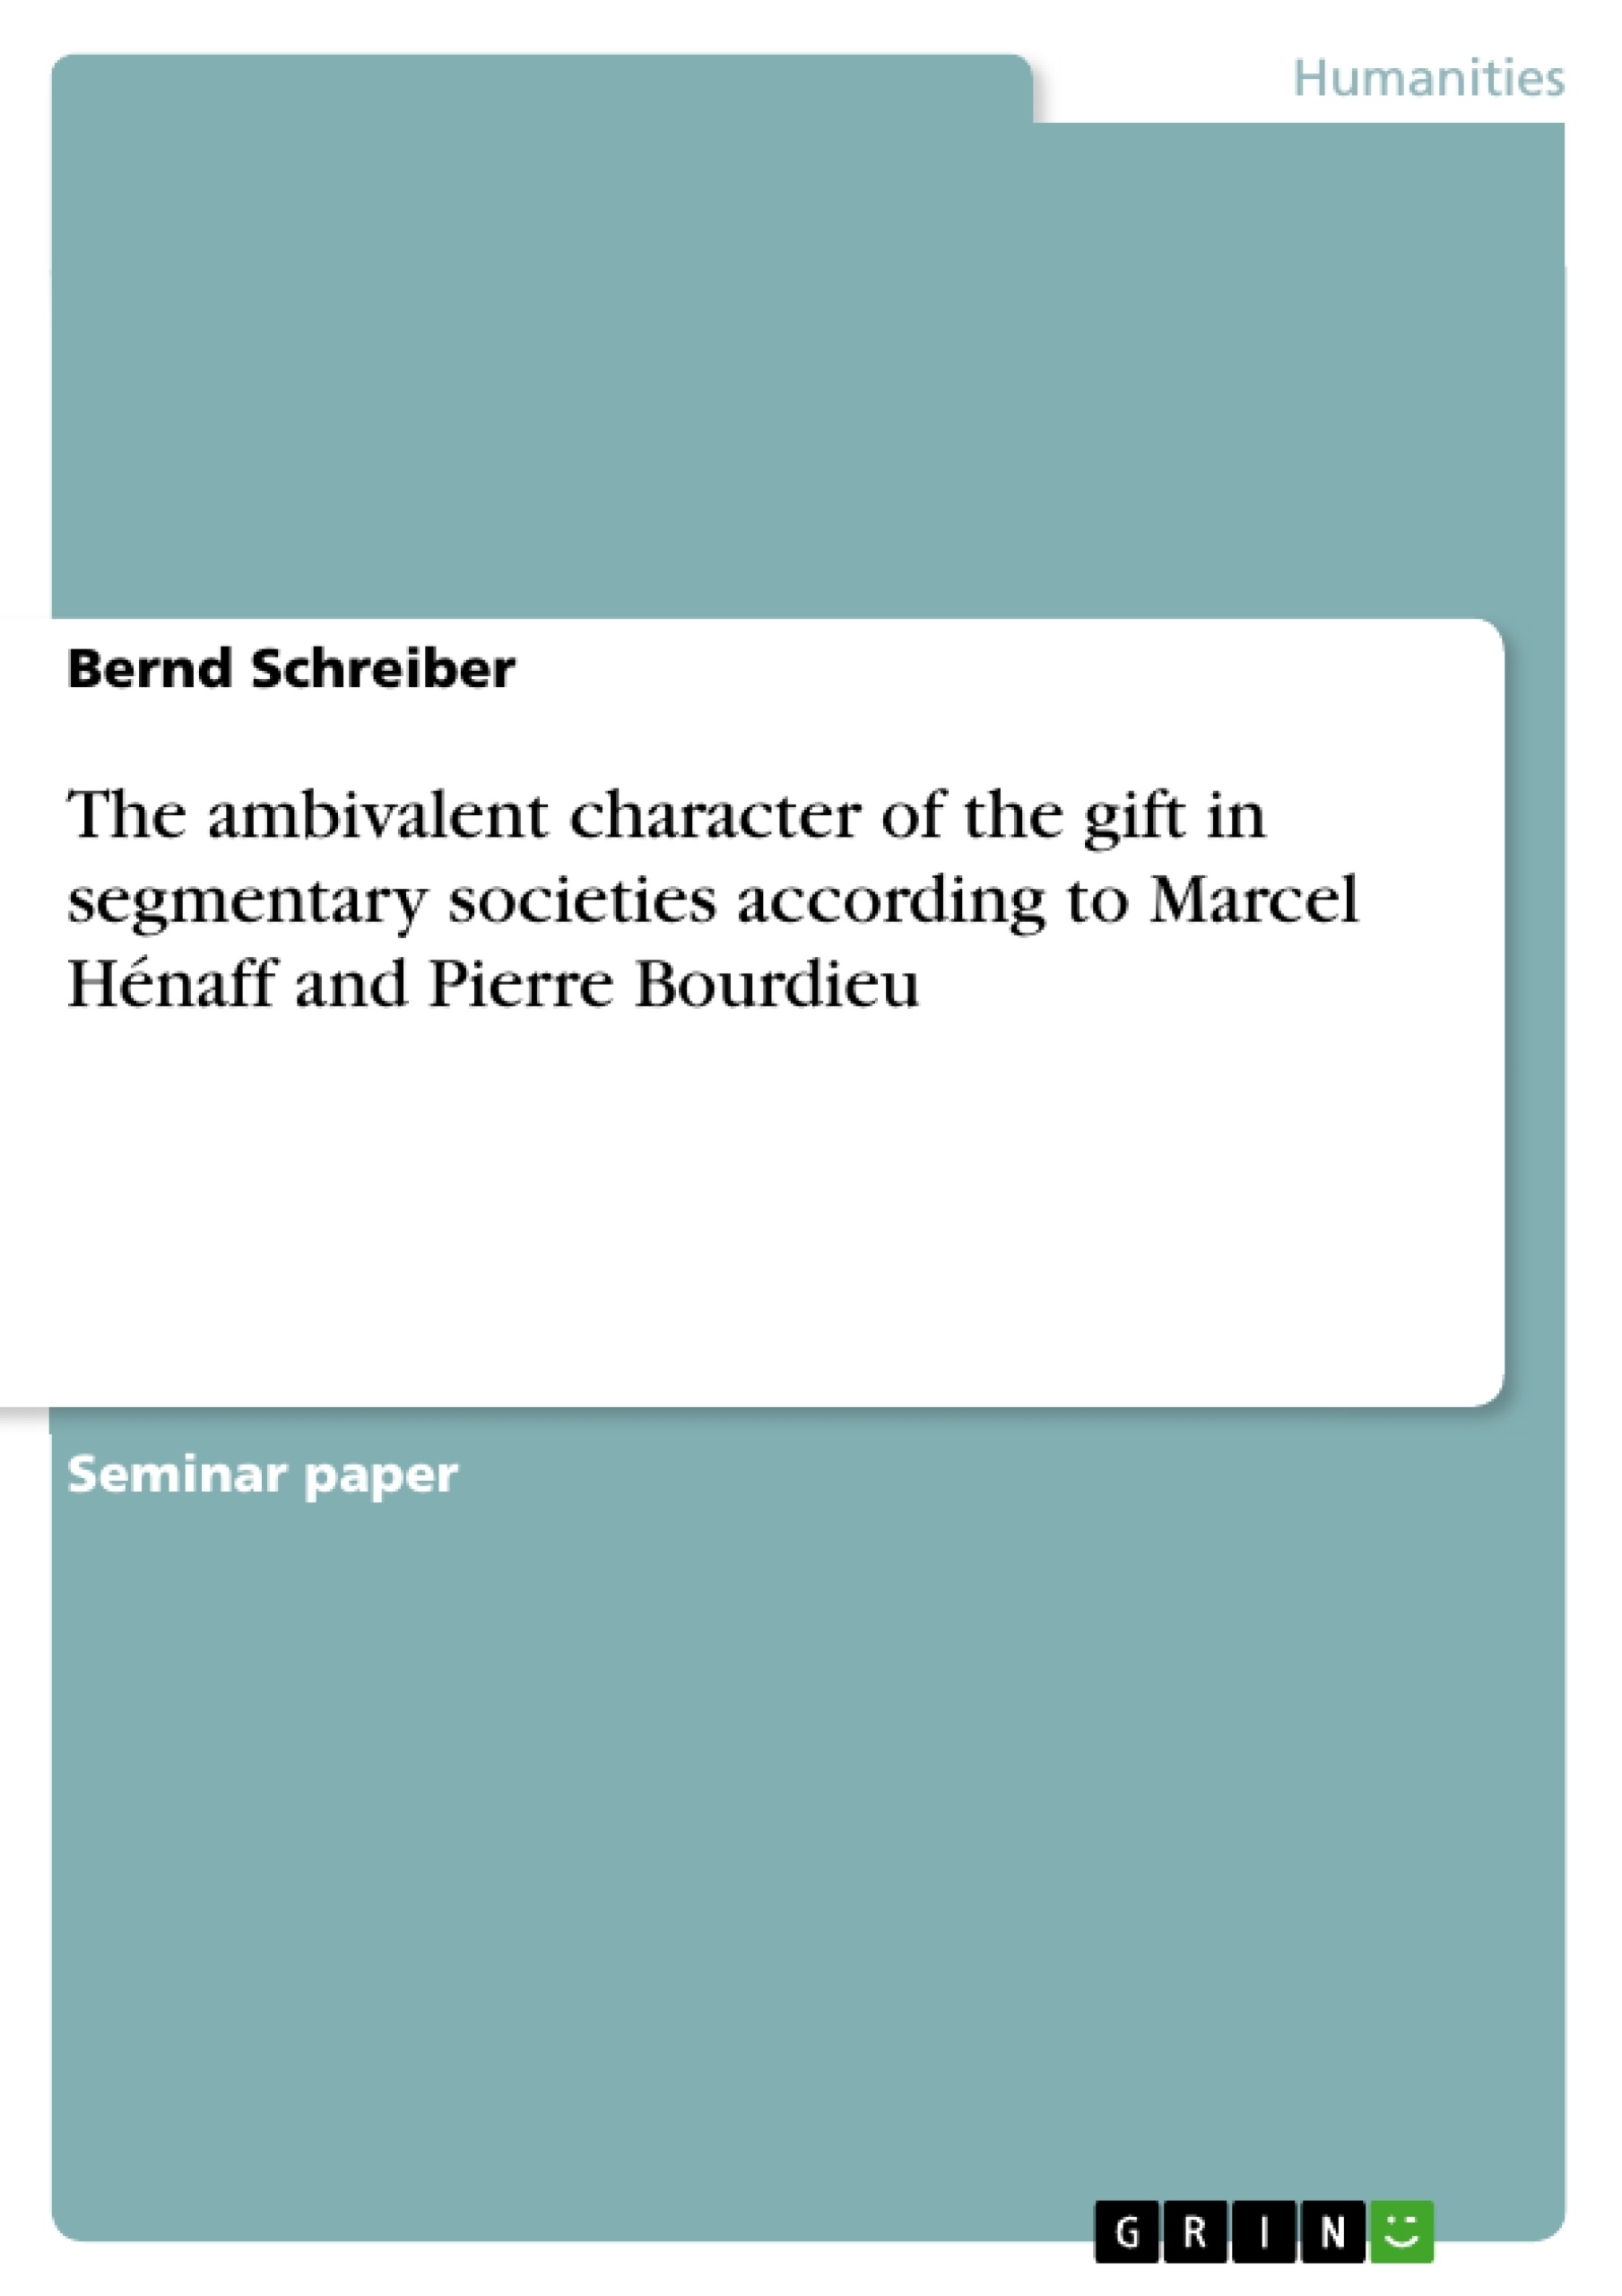 Titre: The ambivalent character of the gift in segmentary societies according to Marcel Hénaff and Pierre Bourdieu